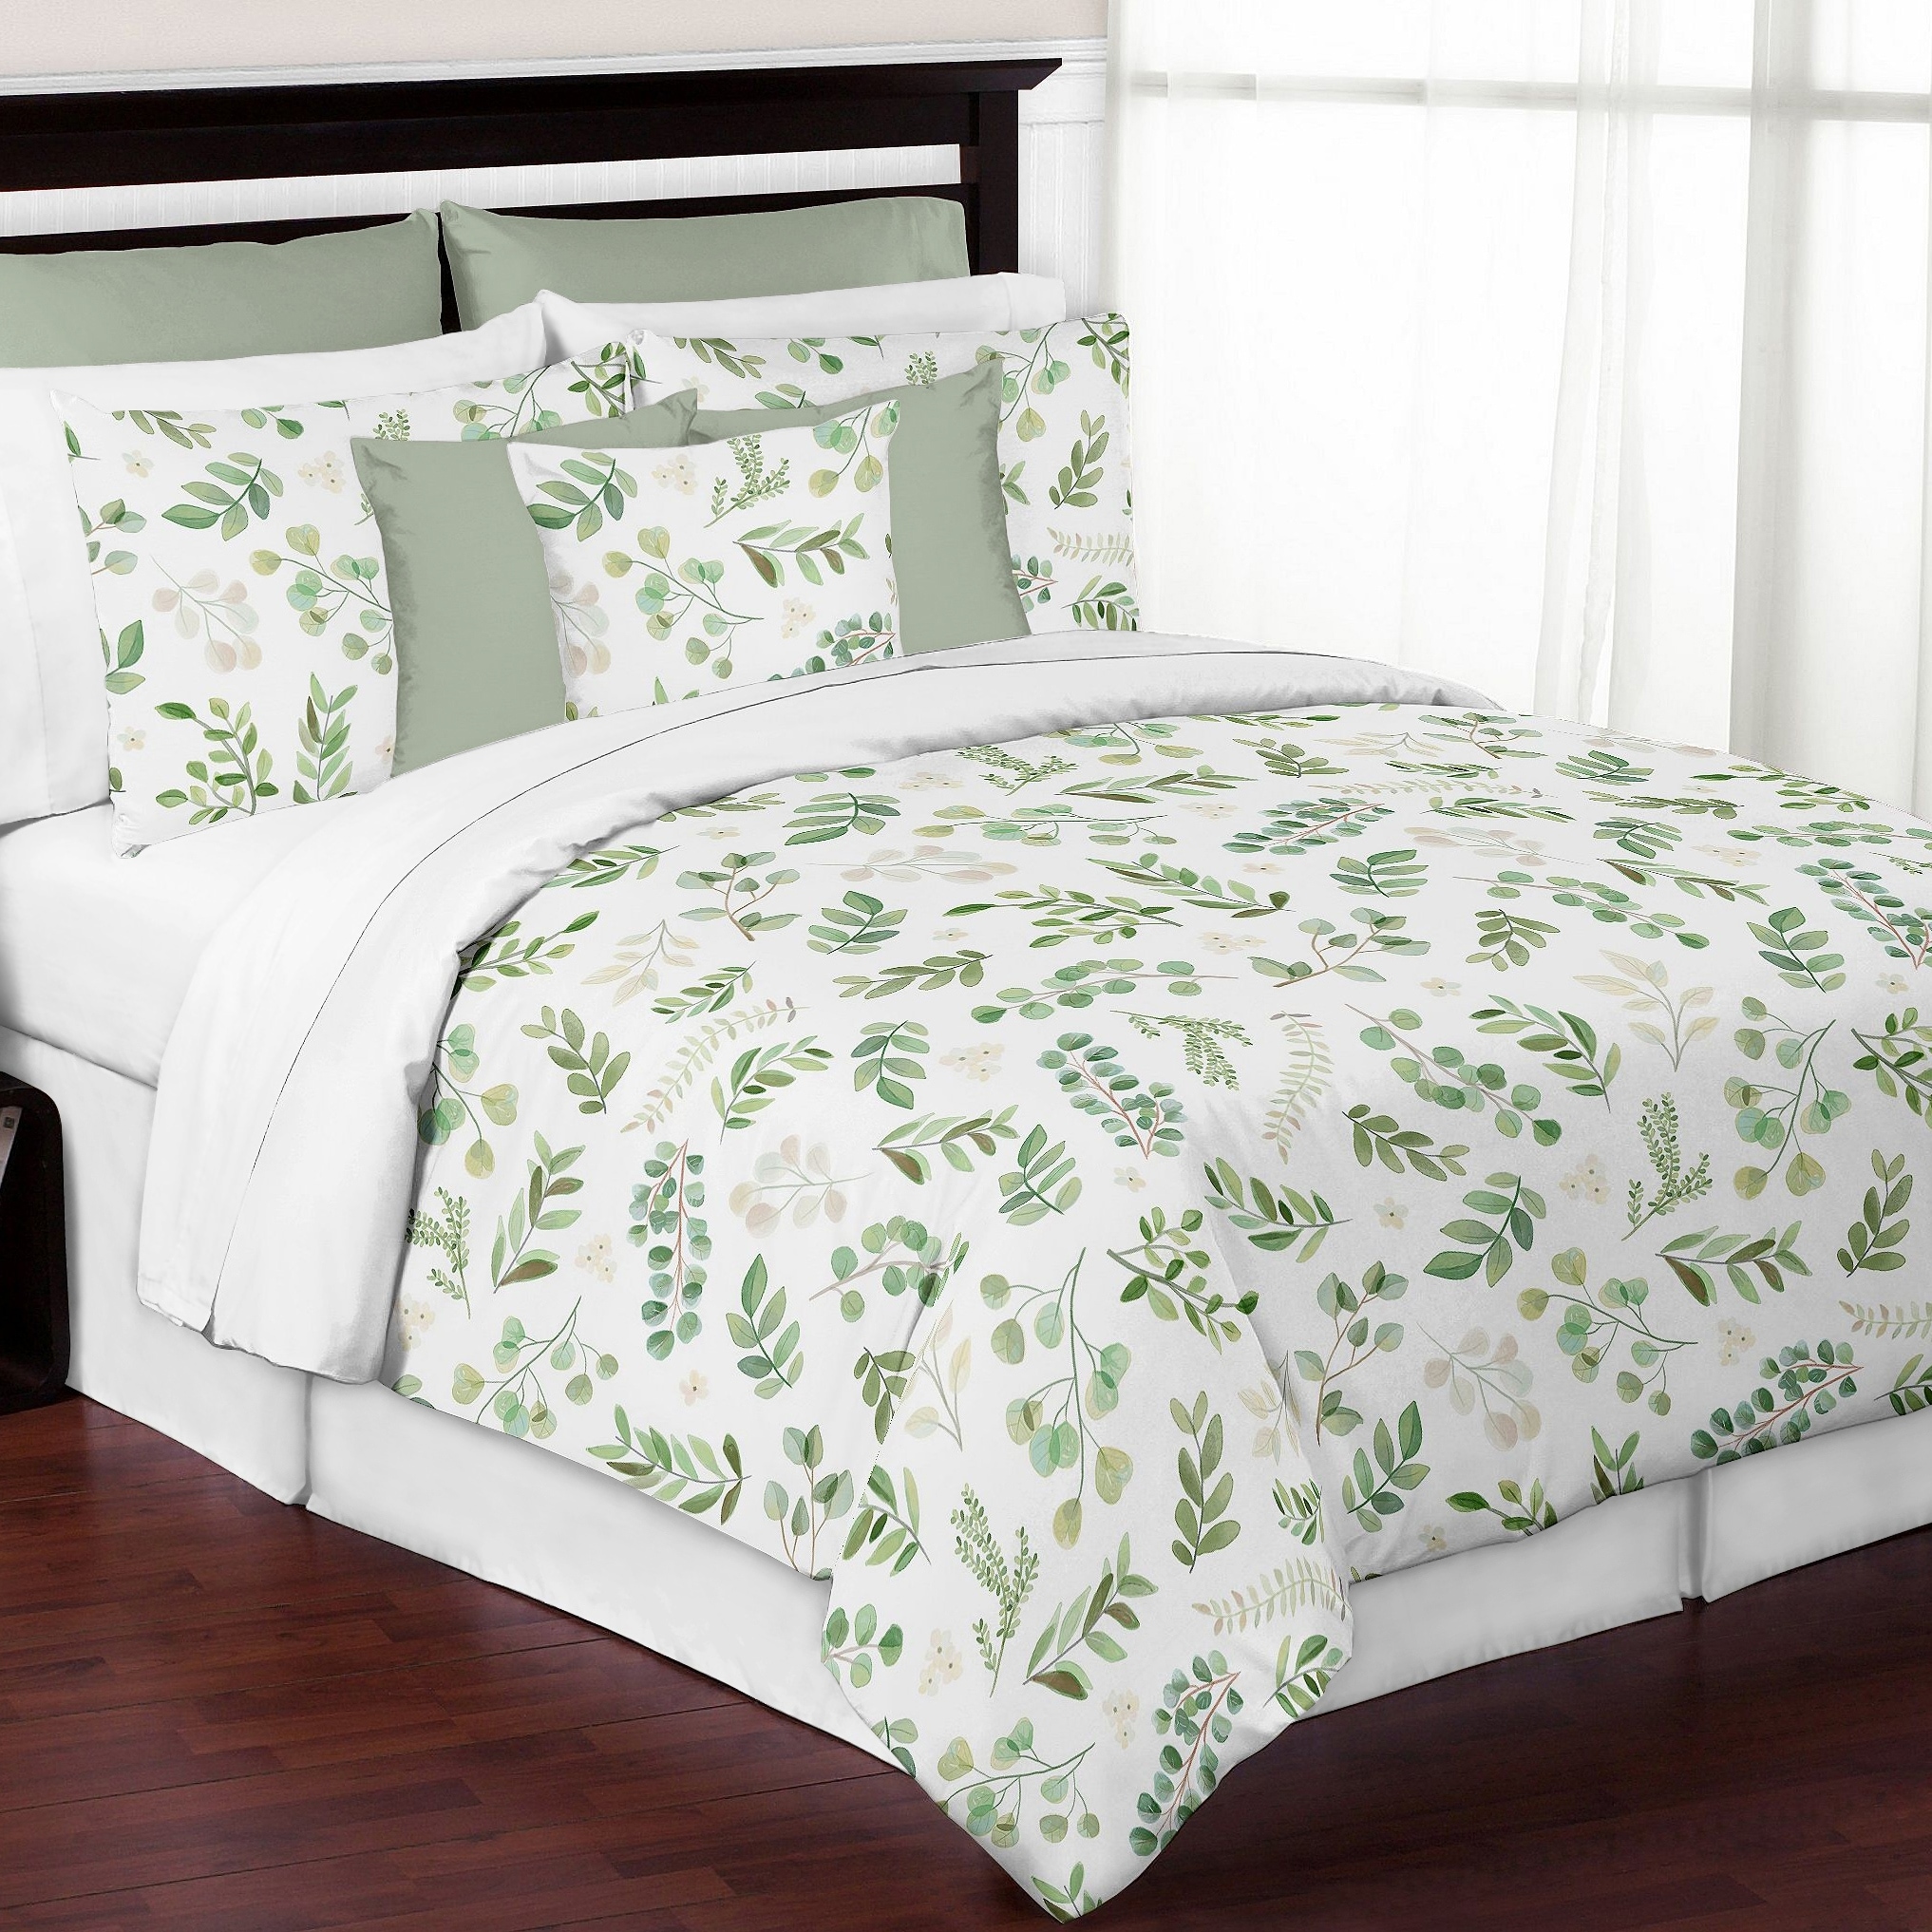 Wellboo Botanical Comforters Queen White and Green Floral Bedding Comforter  Sets Sage Green Plant Bedding Full Girls Women Cotton Watercolor Flower